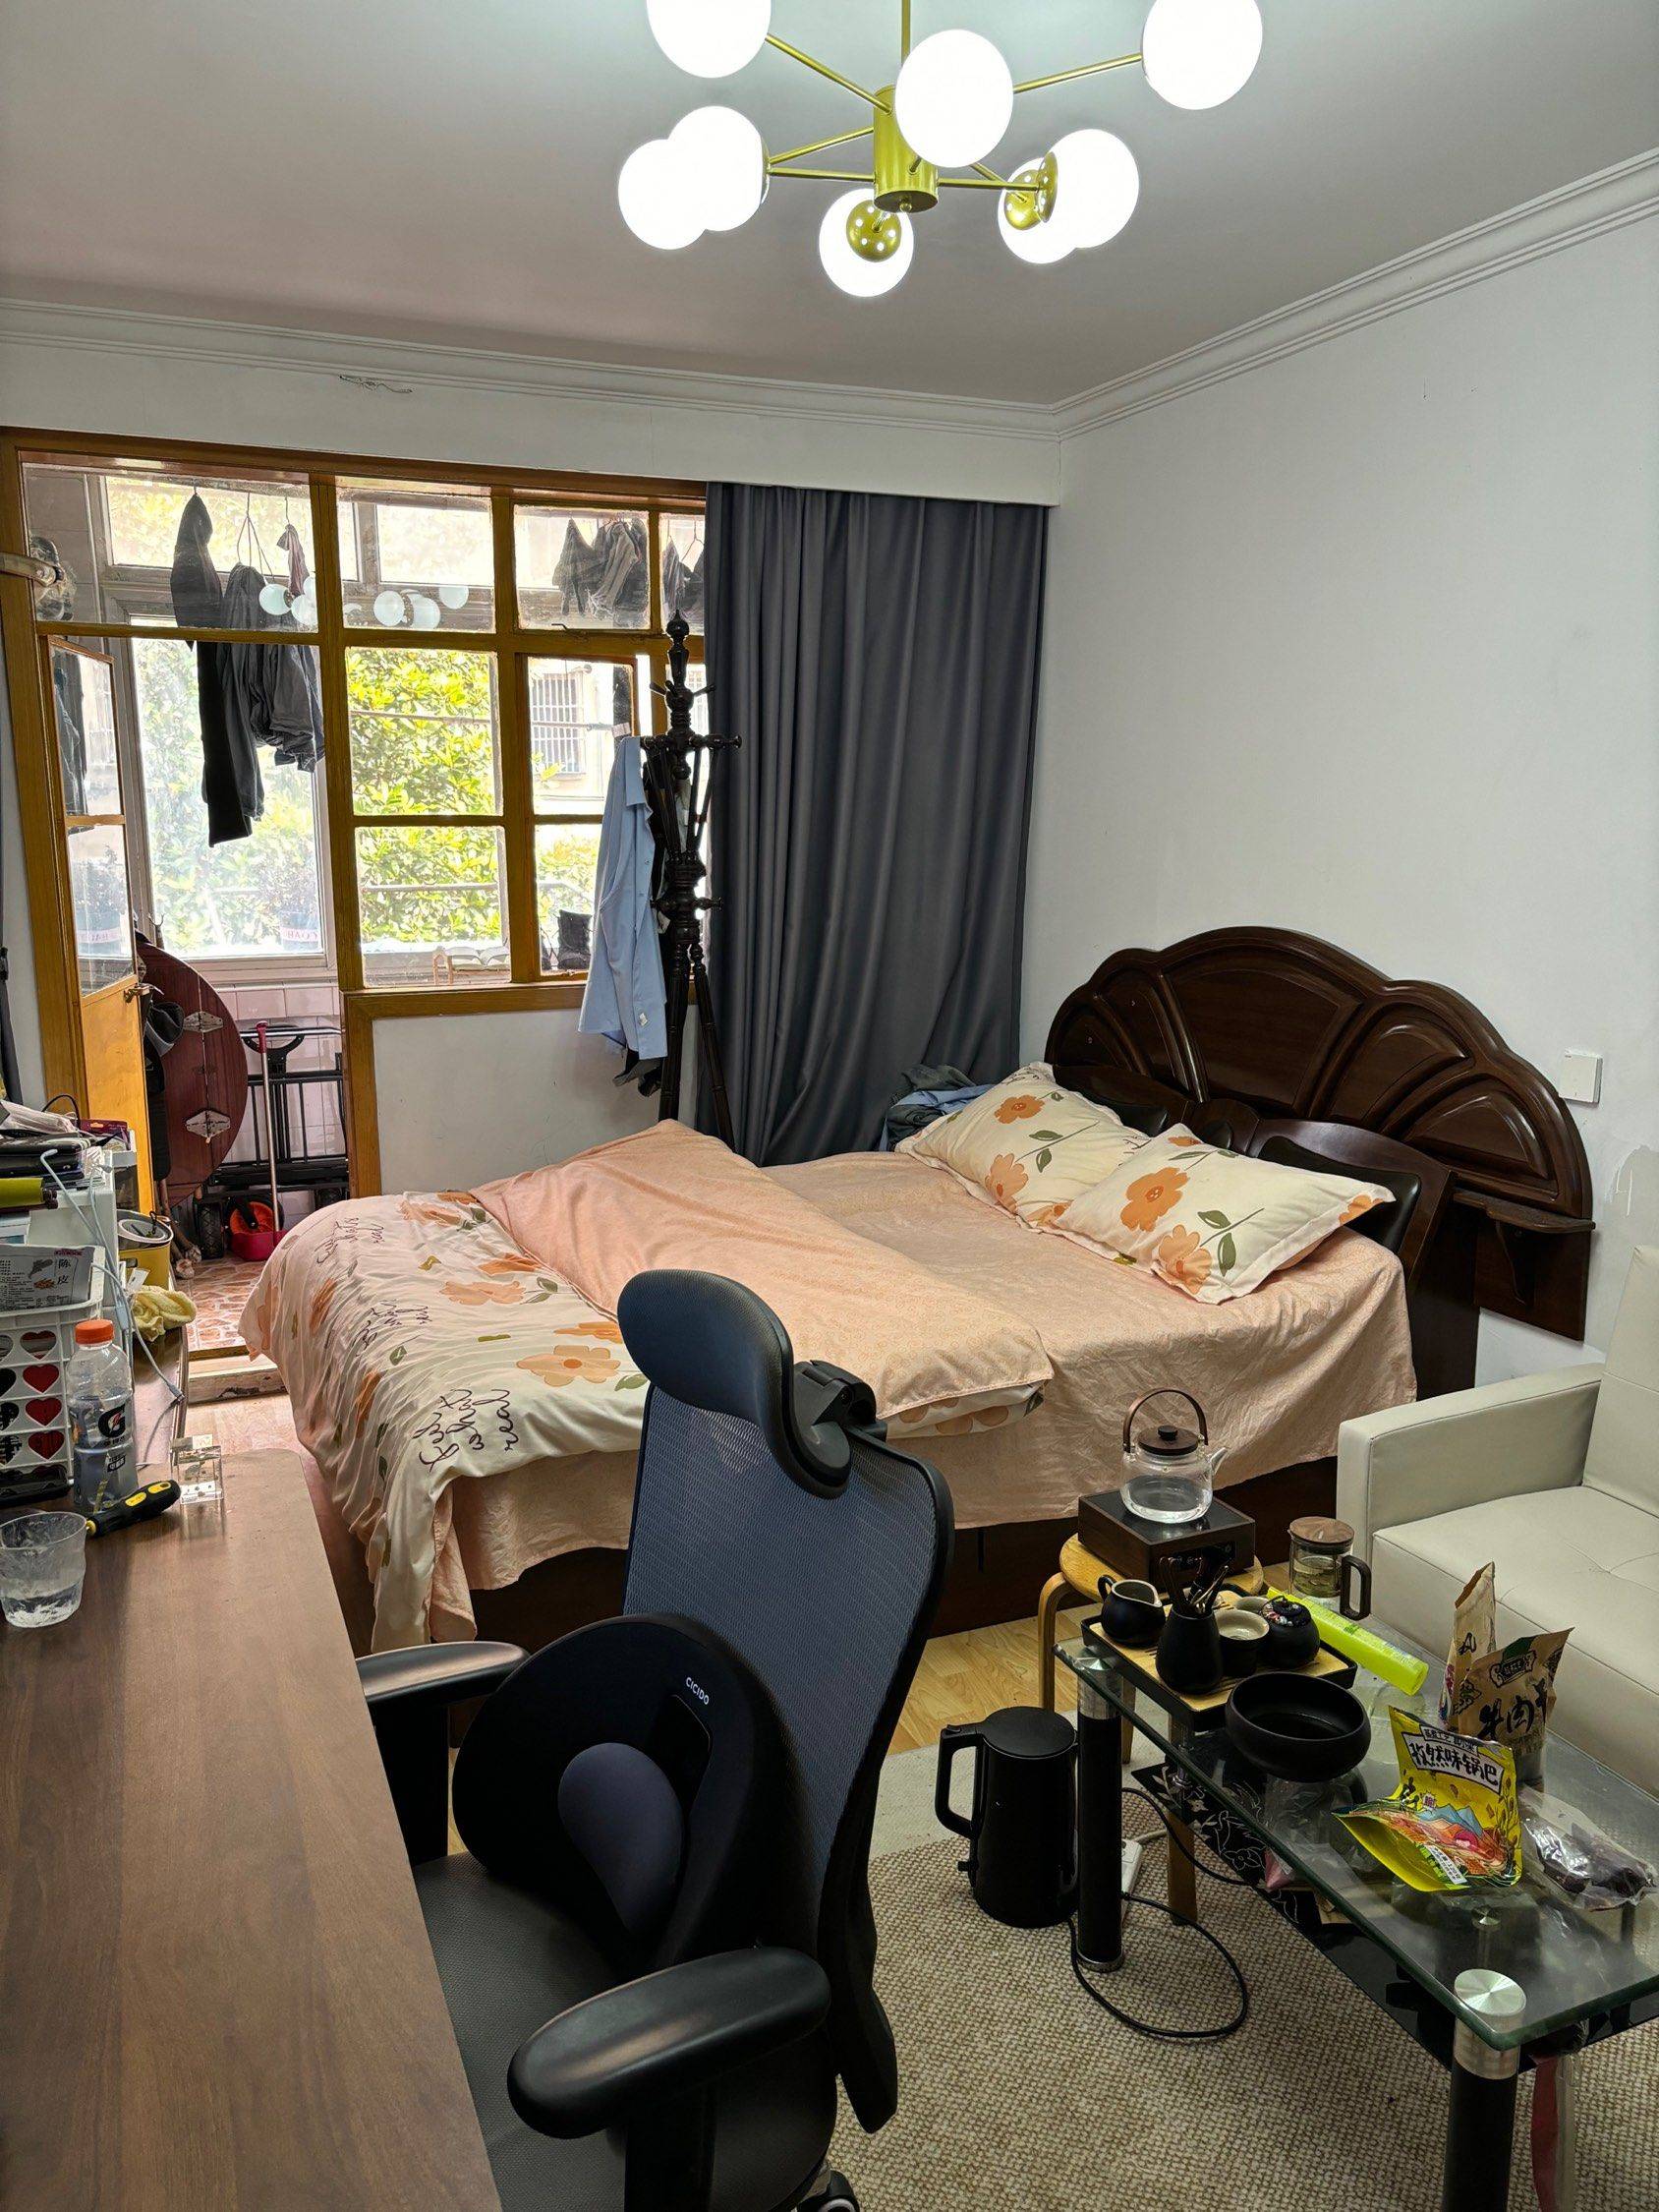 Shanghai-Putuo-Cozy Home,Clean&Comfy,Chilled